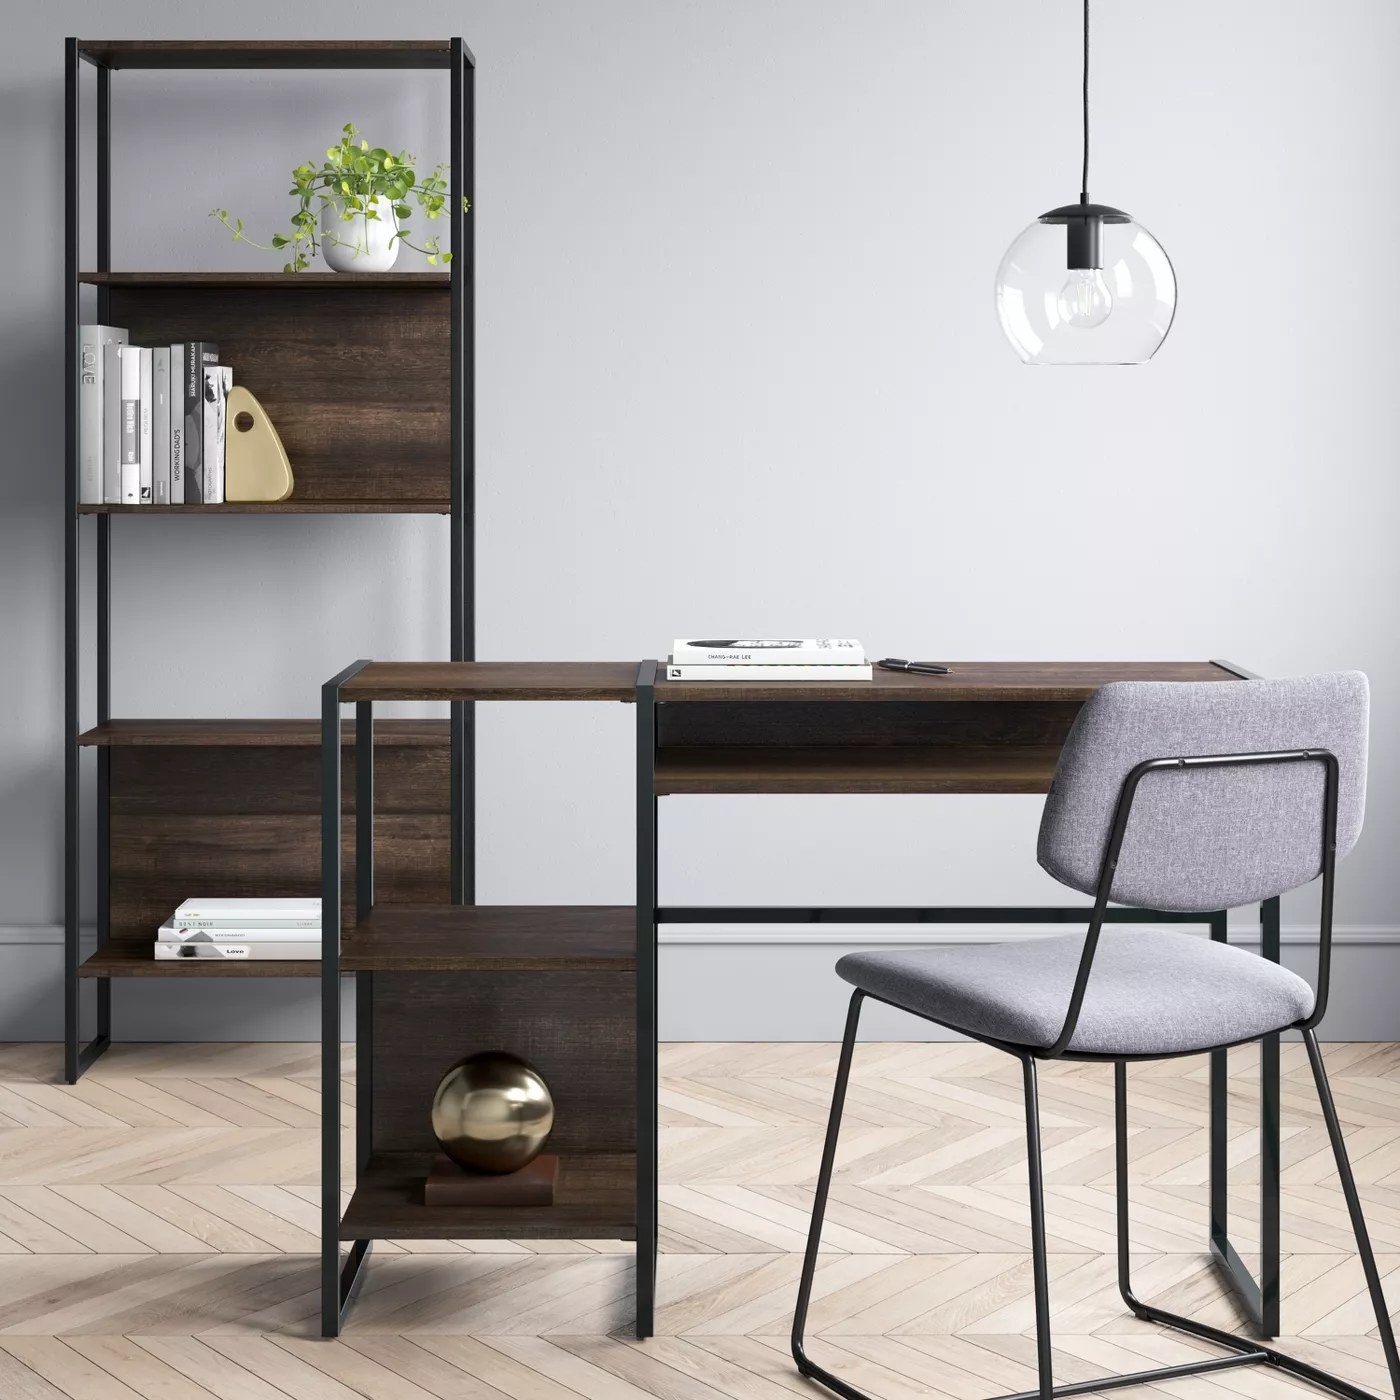 The brown and black desk with two open shelves and an open drawer